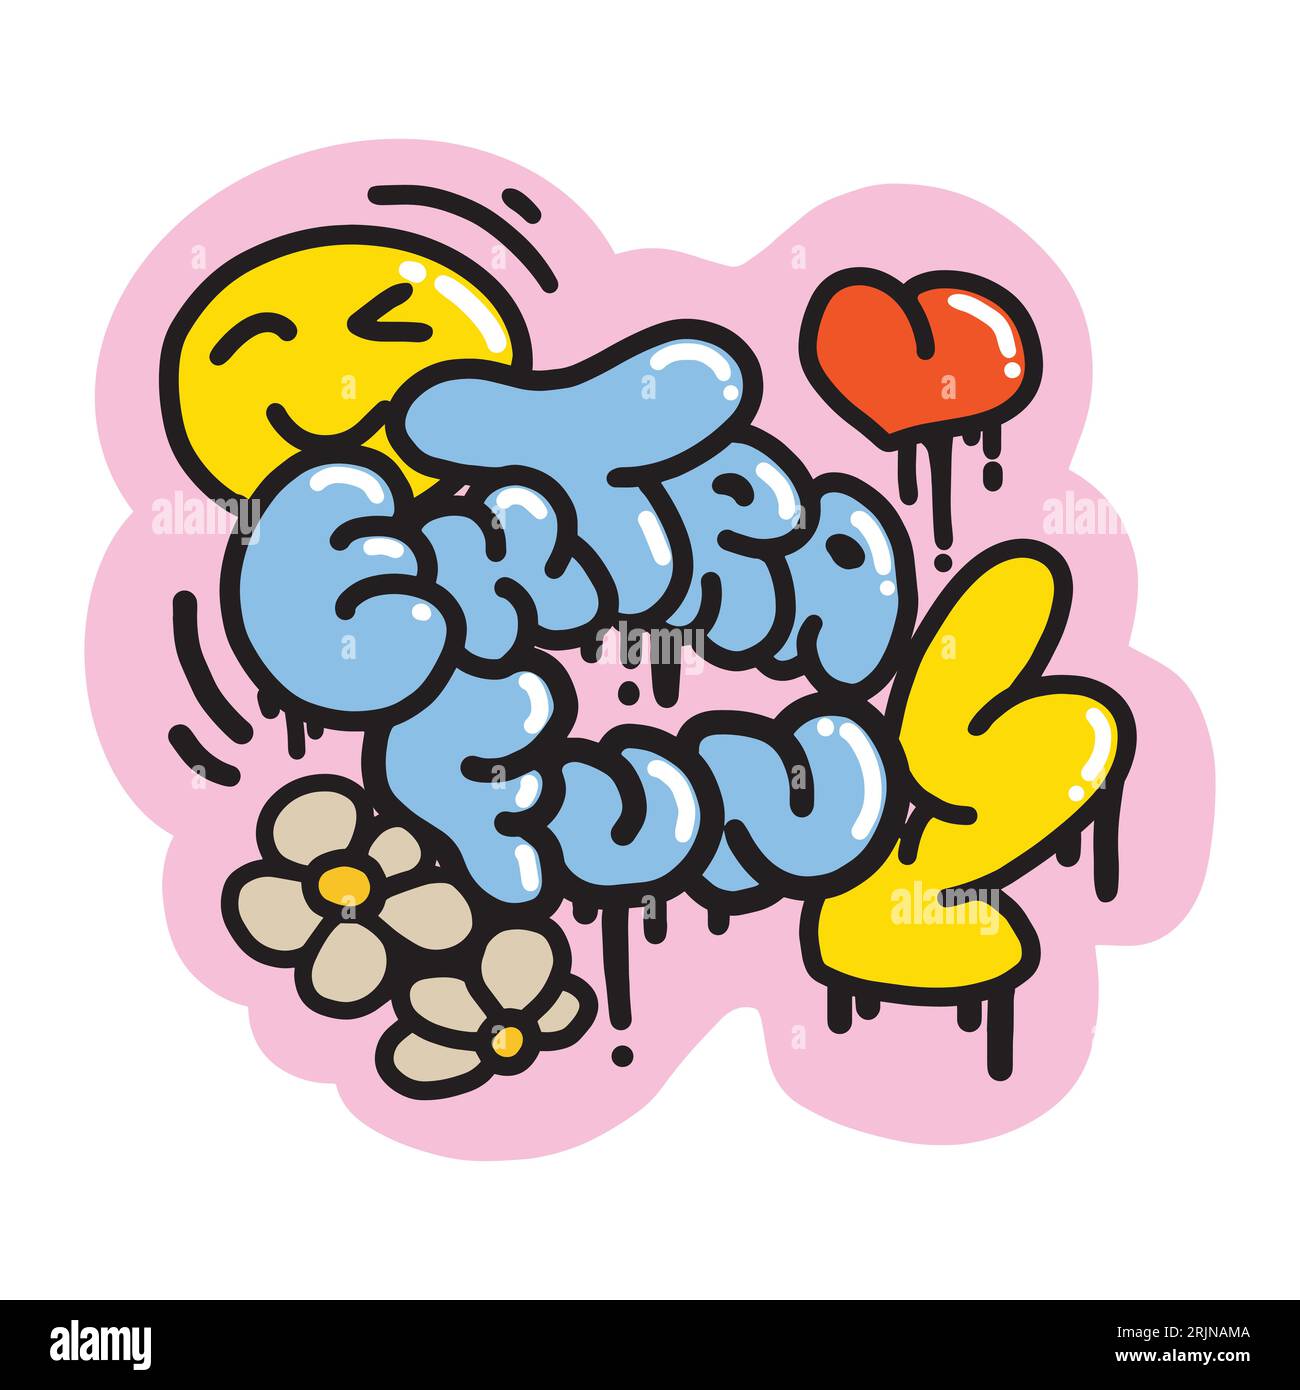 Blue Graffiti Slogan Extra Fun with Cartoon Heart, Lightning, Daisies, Smile. Colorful Urban style Lettering. Vector illustration. Hippie Sticker for T-Shirts, Wallpaper, Case Phone. Stock Vector